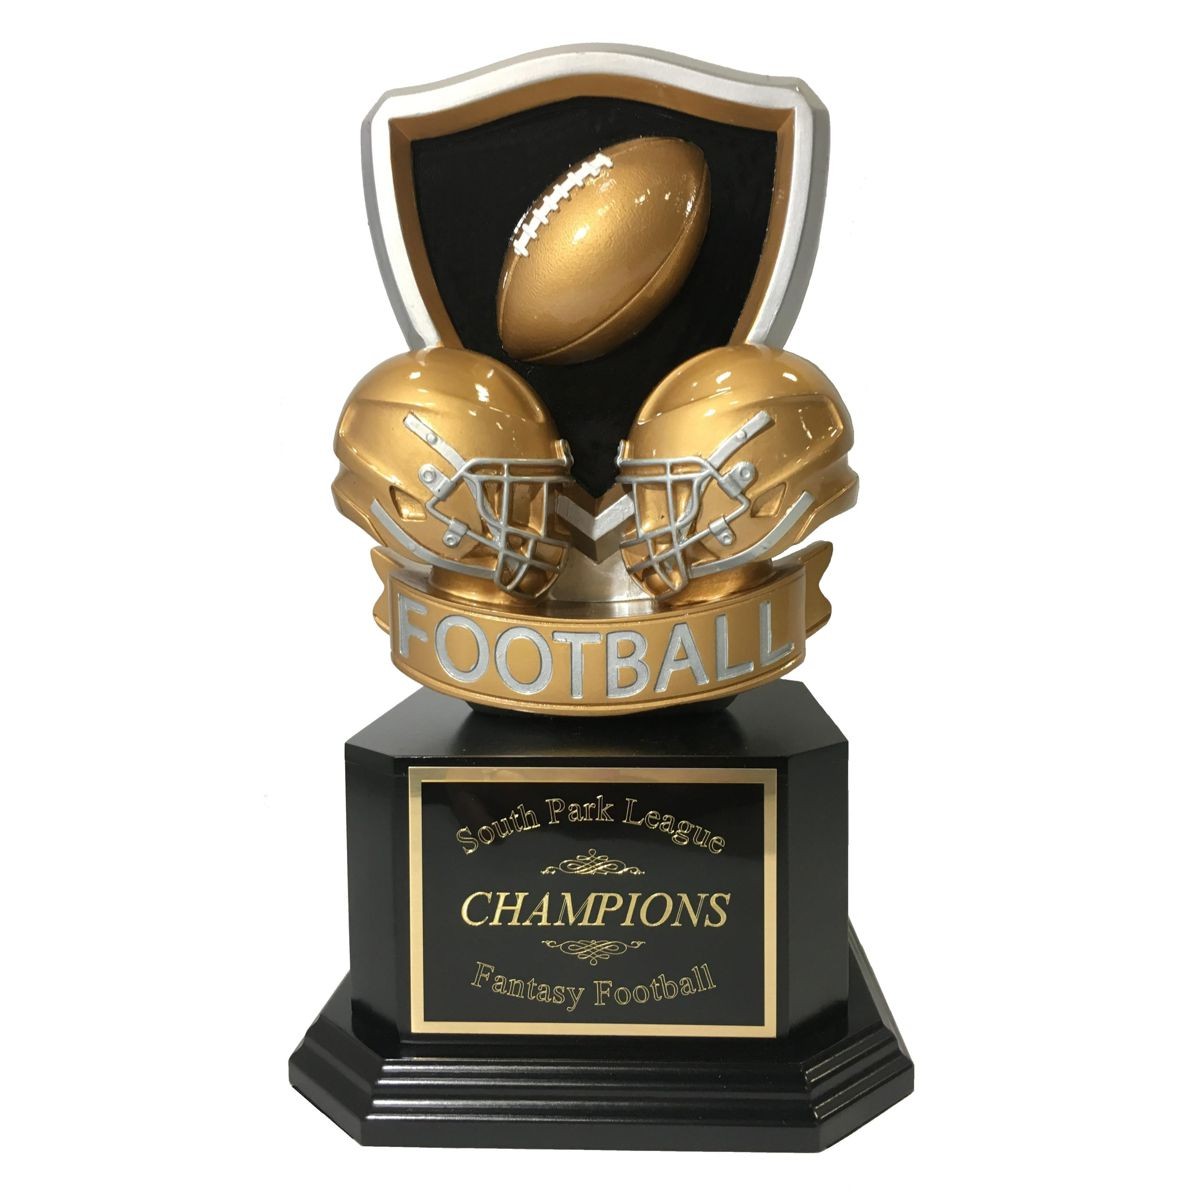 6 YEAR COLOR FOOTBALL FANTASY FOOTBALL TROPHY SHIPS IN 1 DAY! FREE ENGRAVING